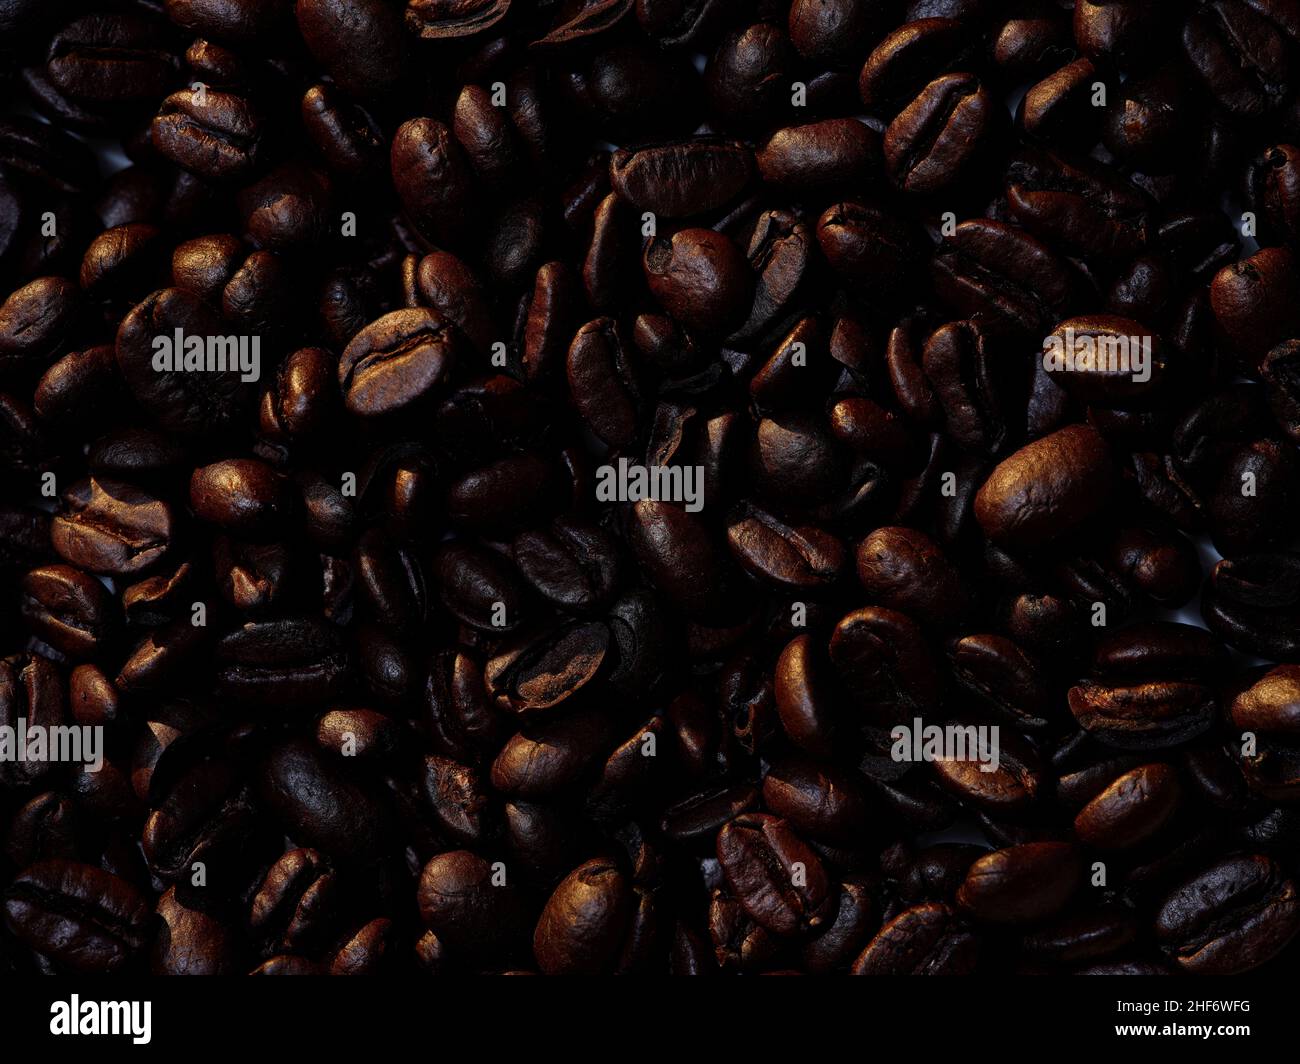 A macro photo of a layer of roasted coffee beans. Stock Photo